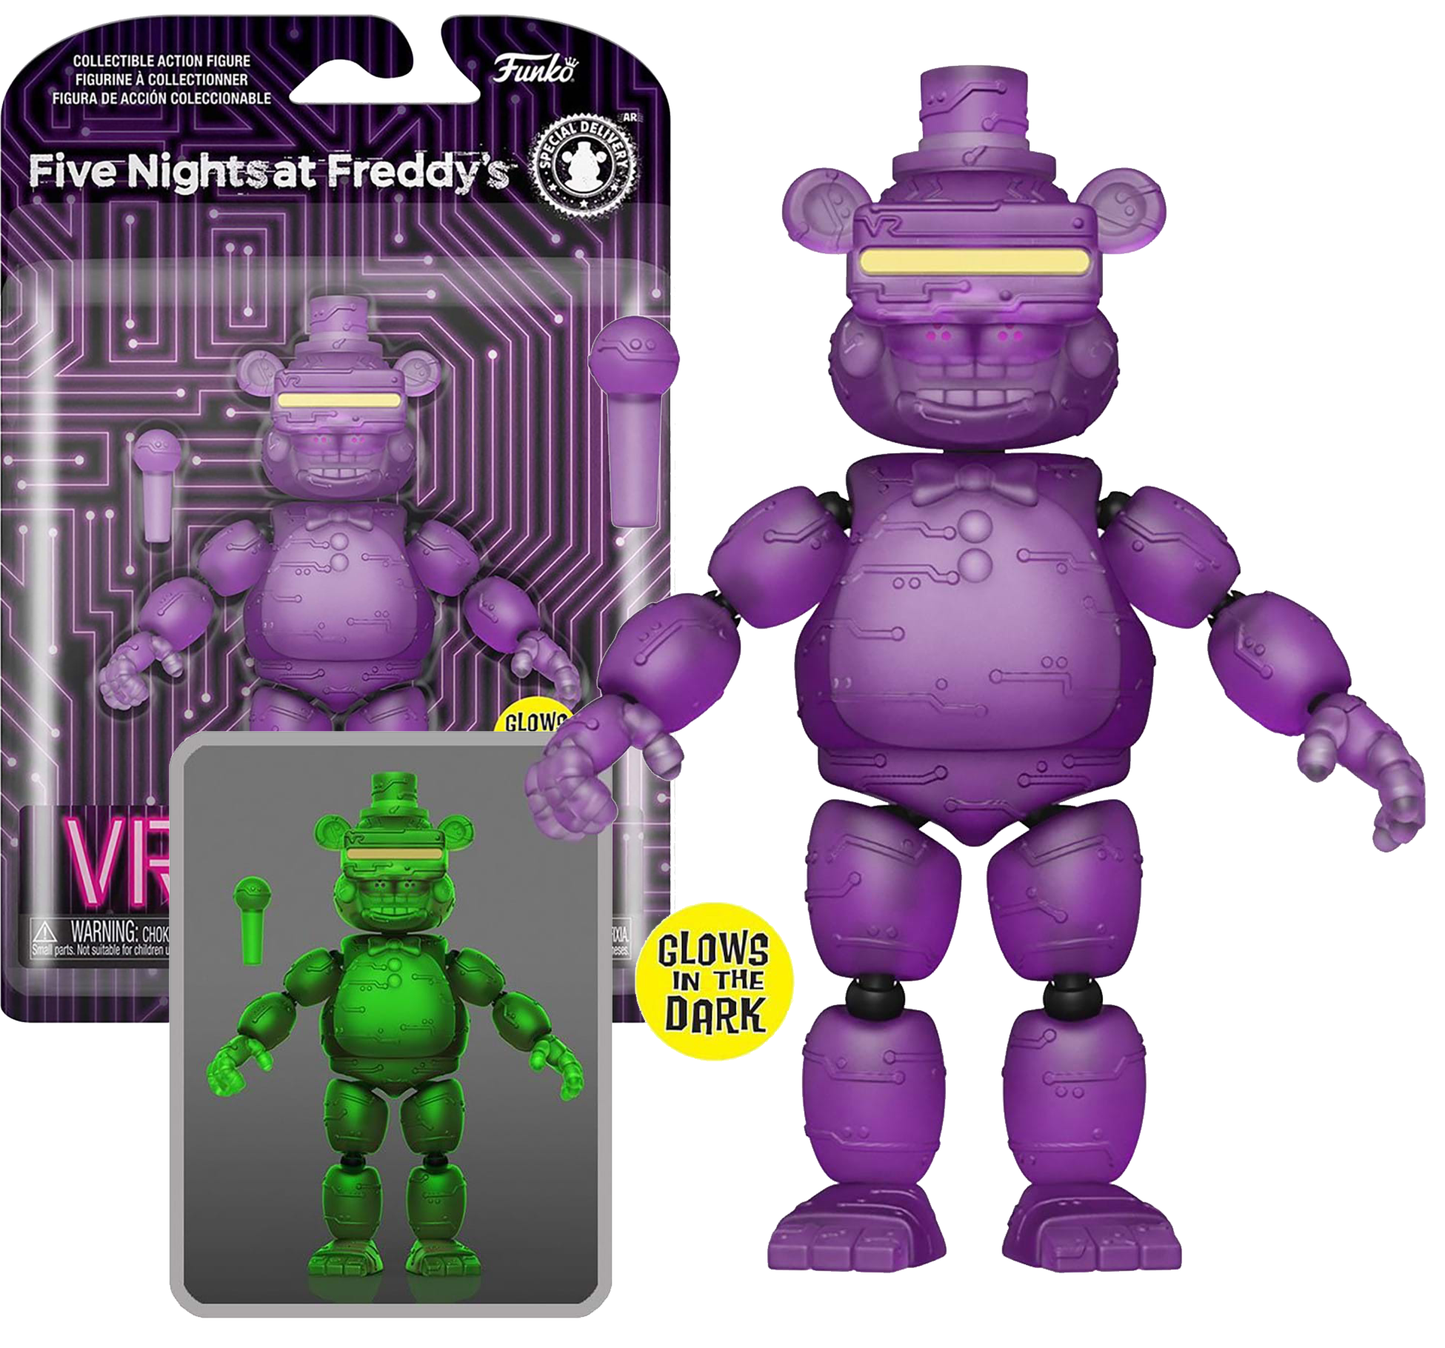 Five Nights at Freddy's VR Freddy Funko Glow In The Dark Action Figure